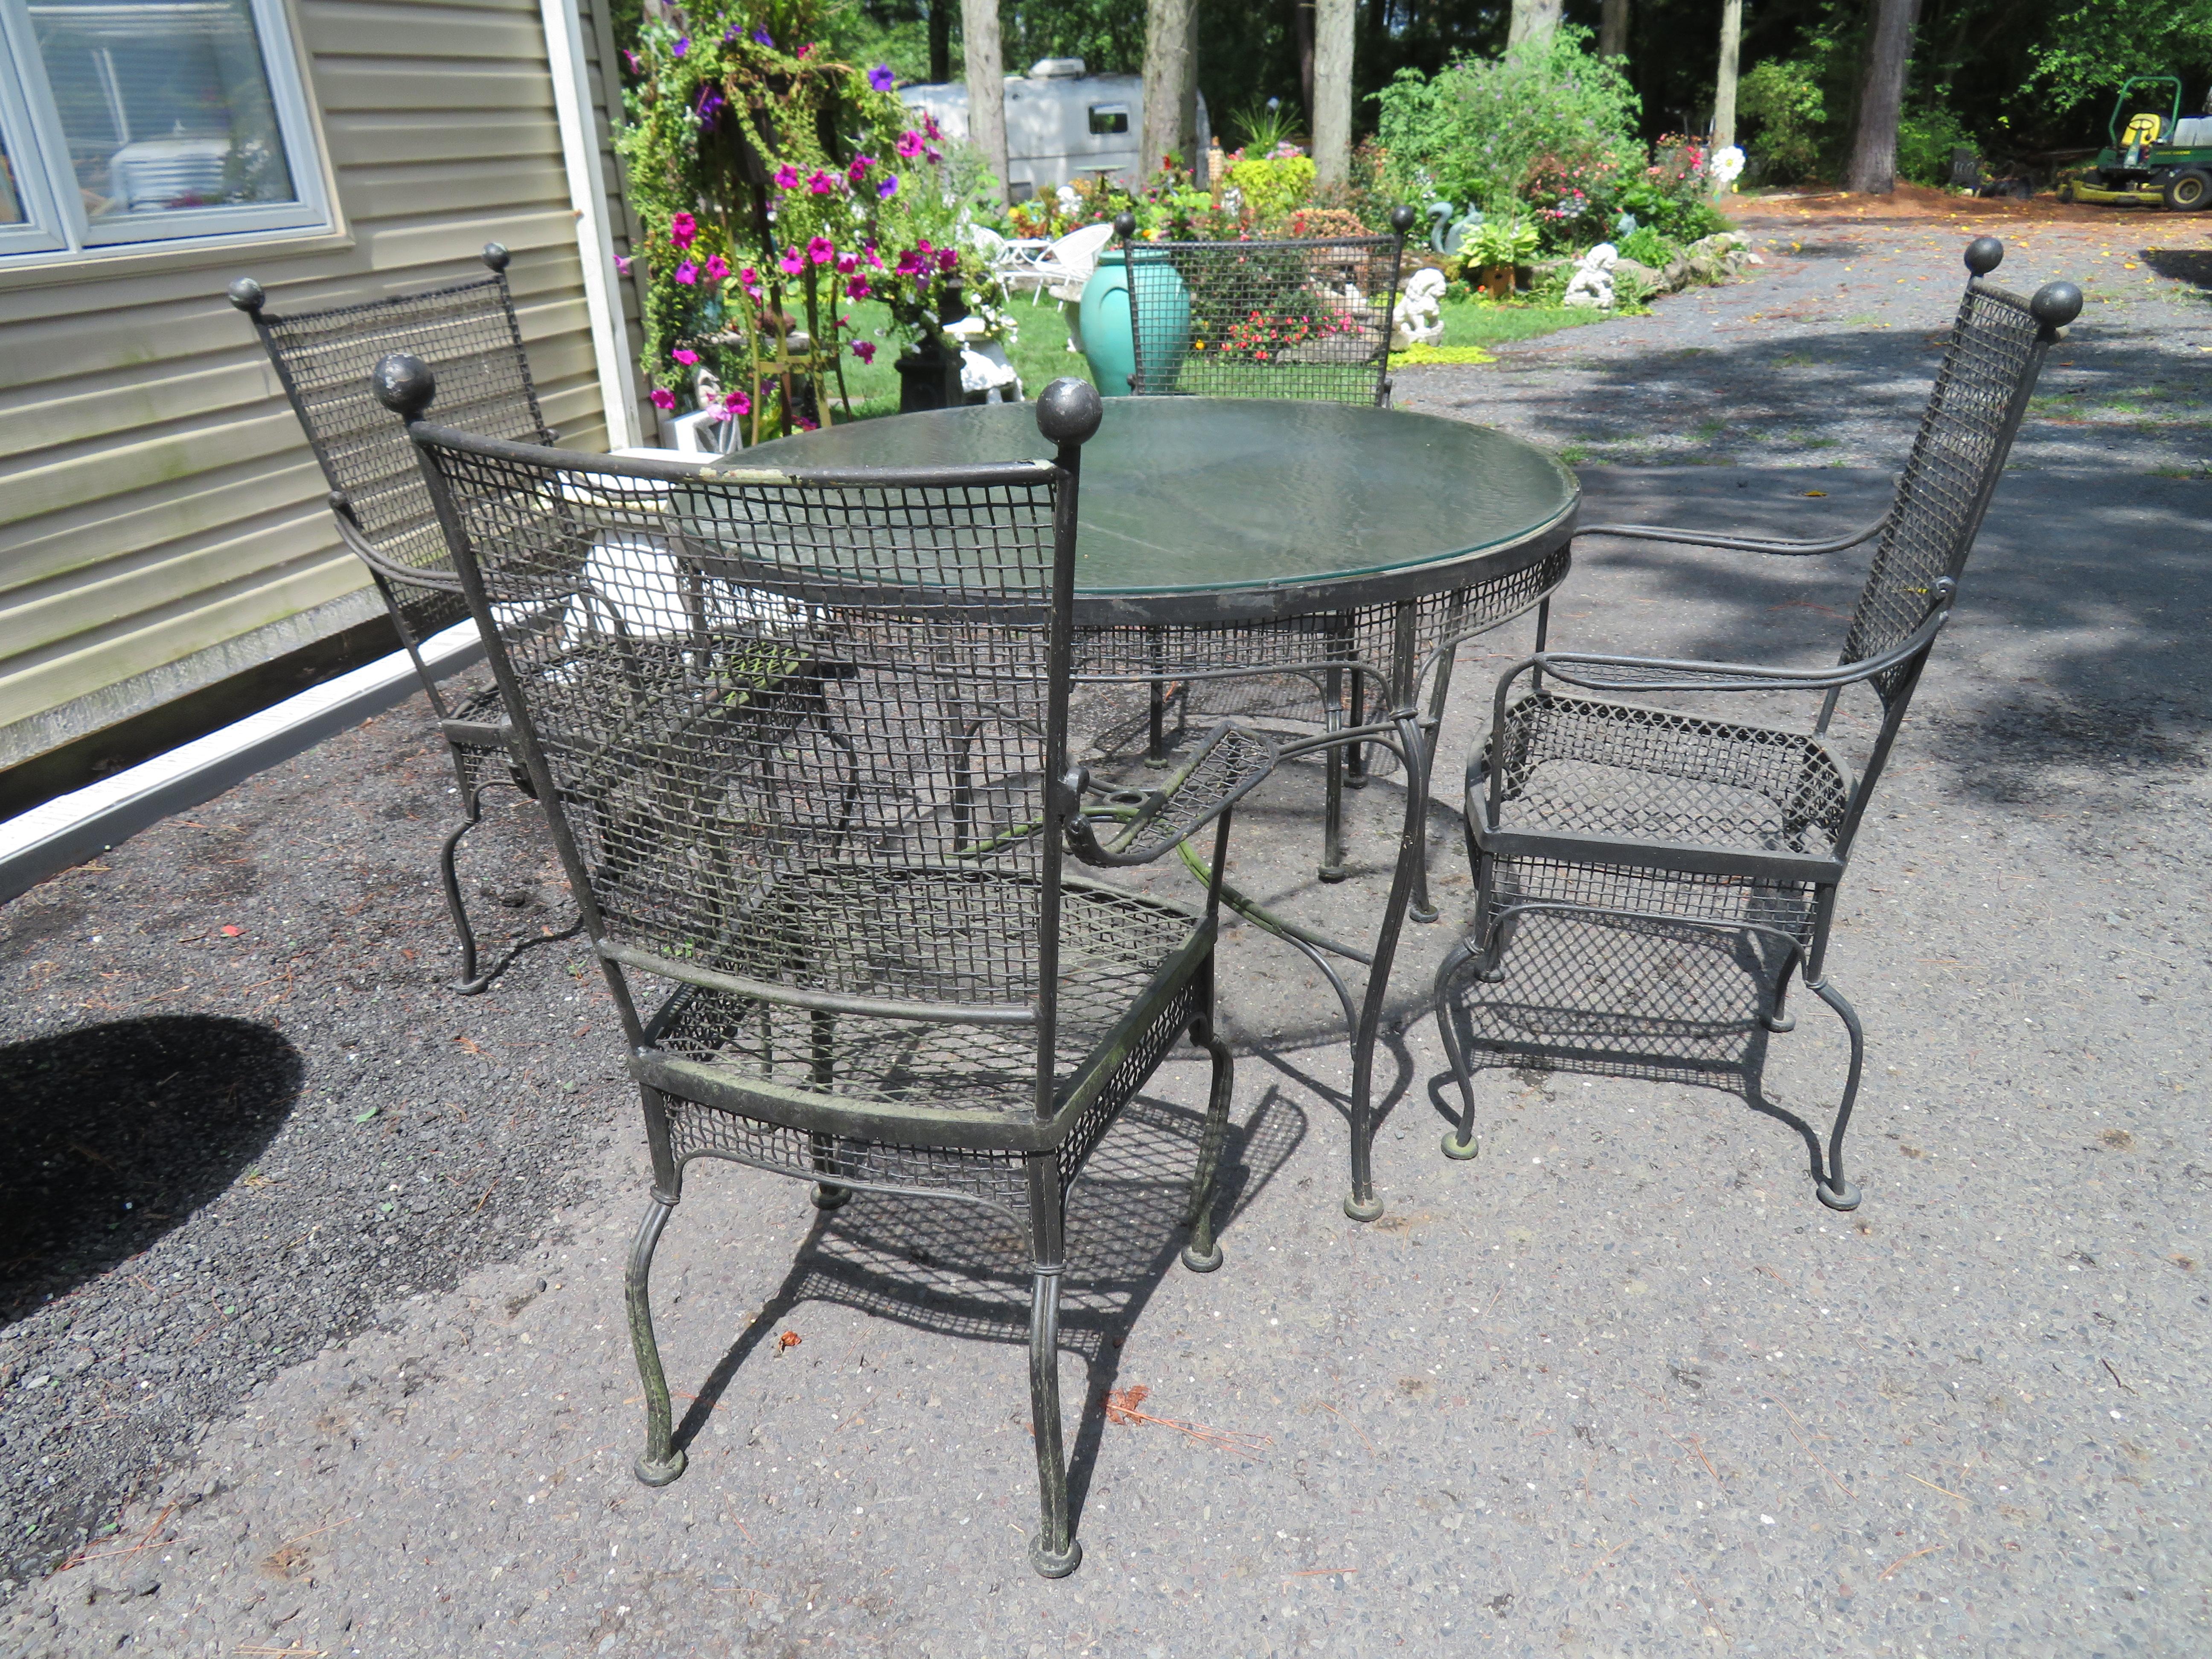 Very rare Russell Woodard 1960’s 5 piece outdoor patio dining set. The heavy mid-century modern armchairs each have 2 large Iron ball top finials on top along with thick iron mesh construction throughout. The matching table has a thick mesh apron